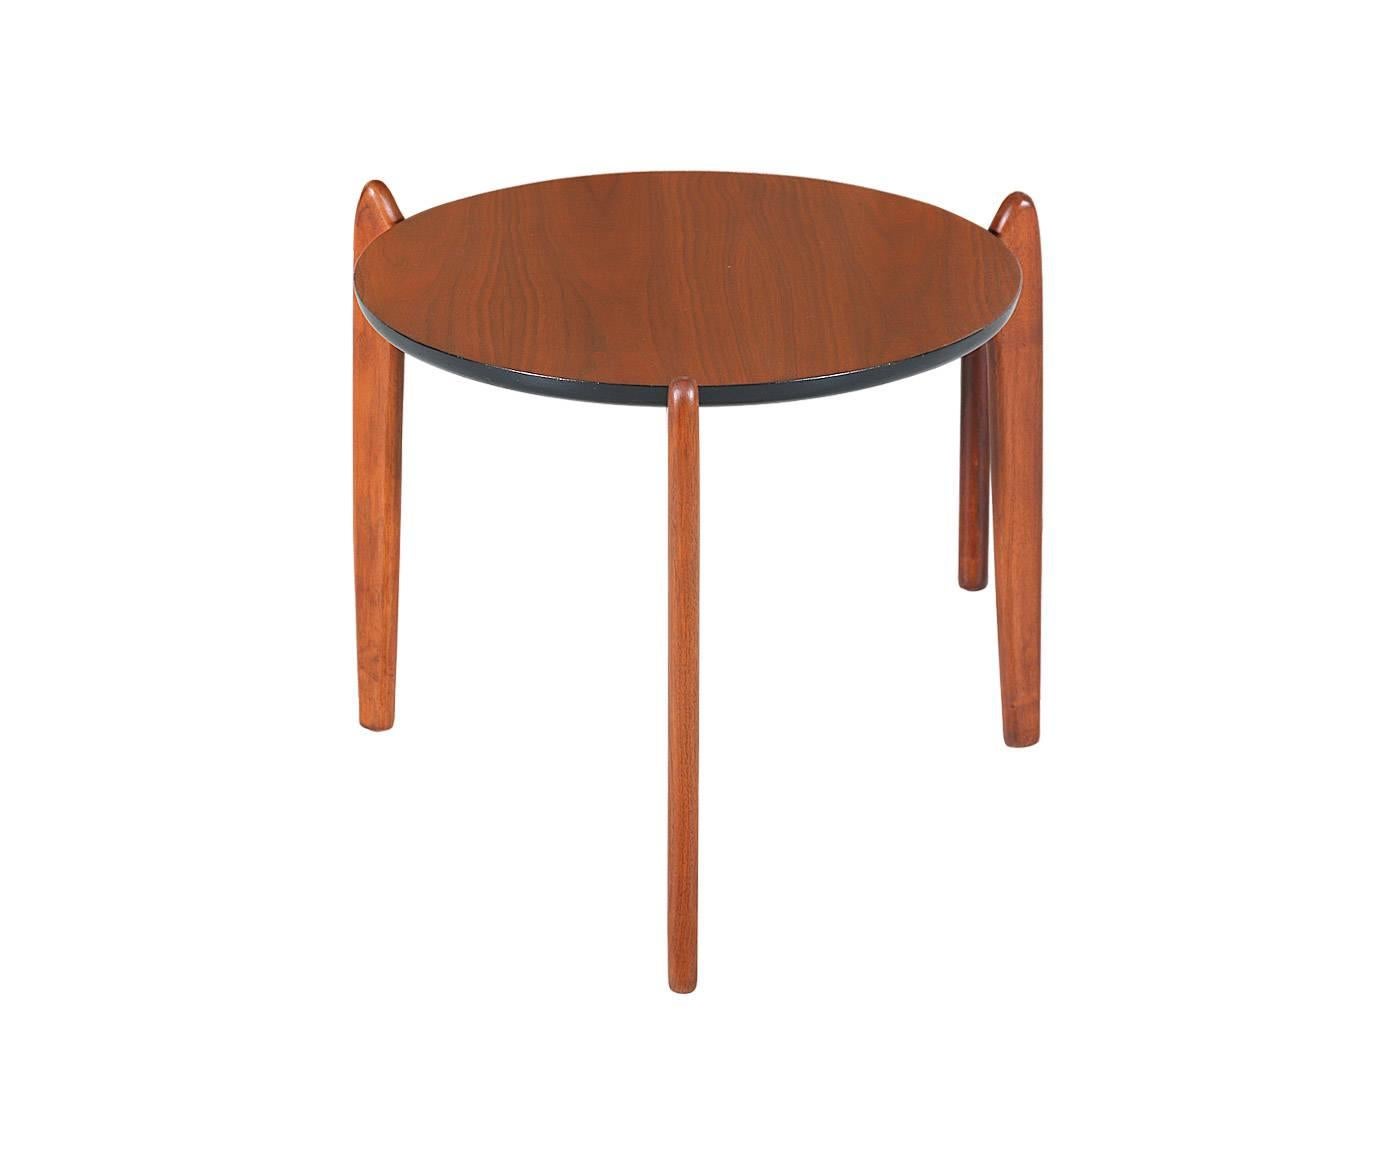 Designer: Adrian Pearsall.
Manufacturer: Craft Associates.
Period/Style: Mid-Century Modern.
Country: United States.
Date: 1950s.

Dimensions: 16.5″ H x 17.5″ D.
Materials: Walnut.
Condition: Excellent – Newly Refinished.
Number of Items: